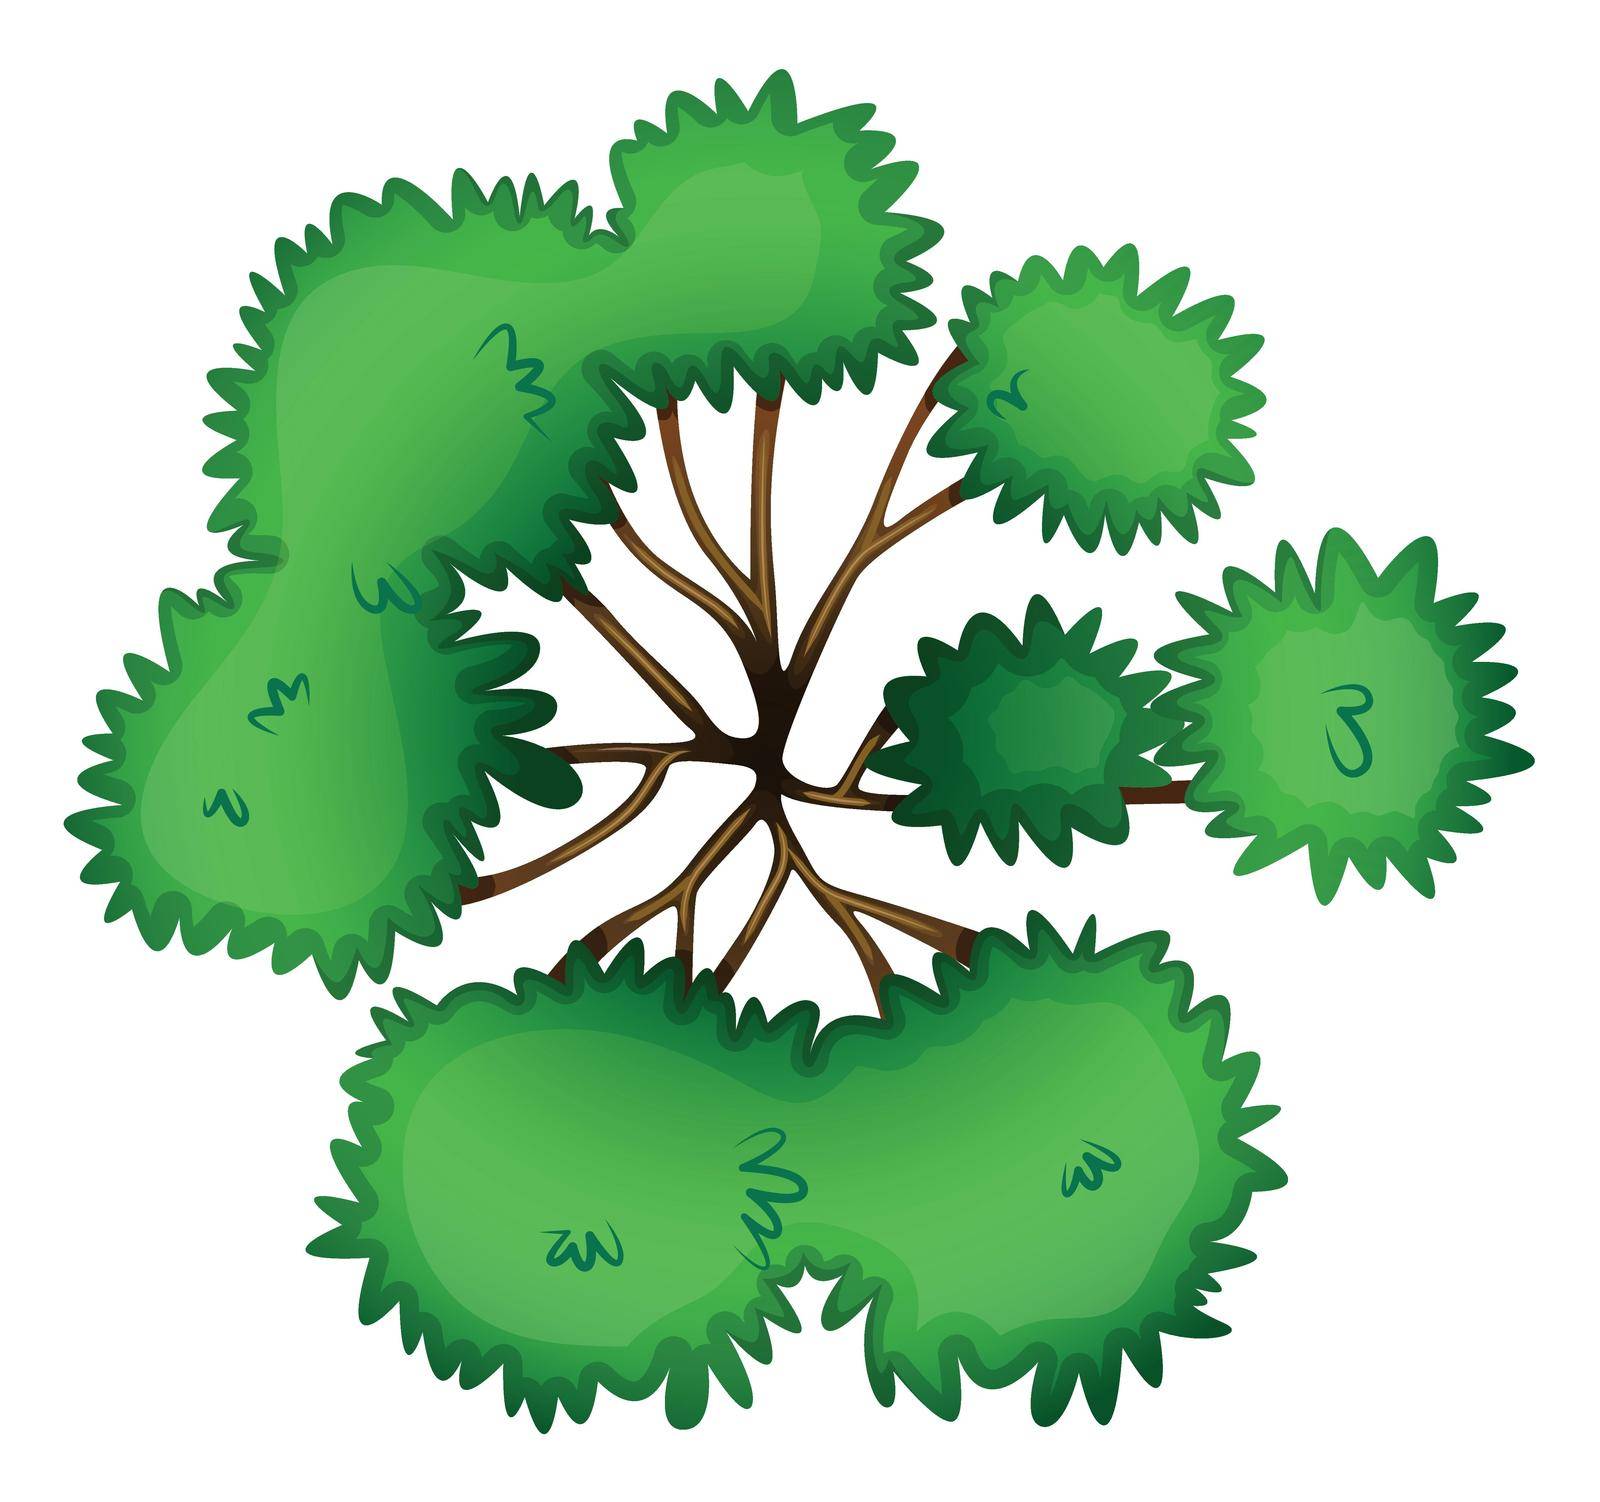 Illustration of a topview of a tree on a white background